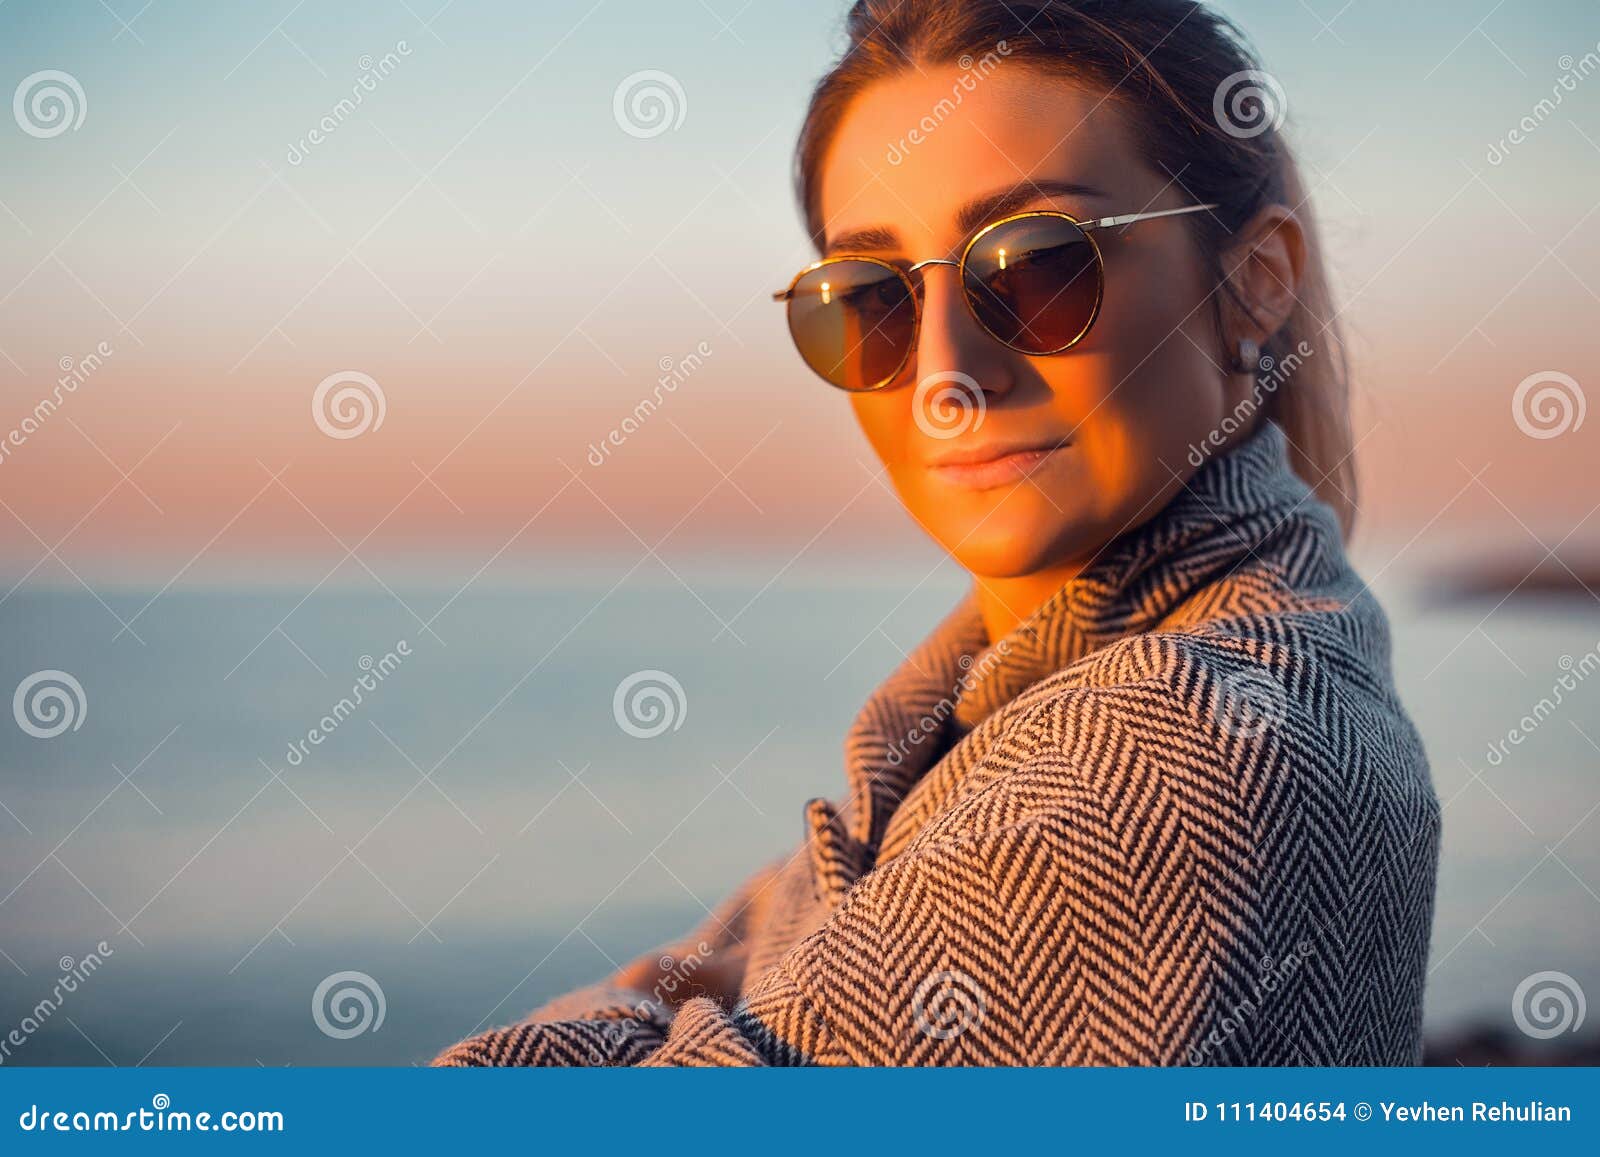 Beautiful Happy Woman In Sunglasses Standing At The Sea